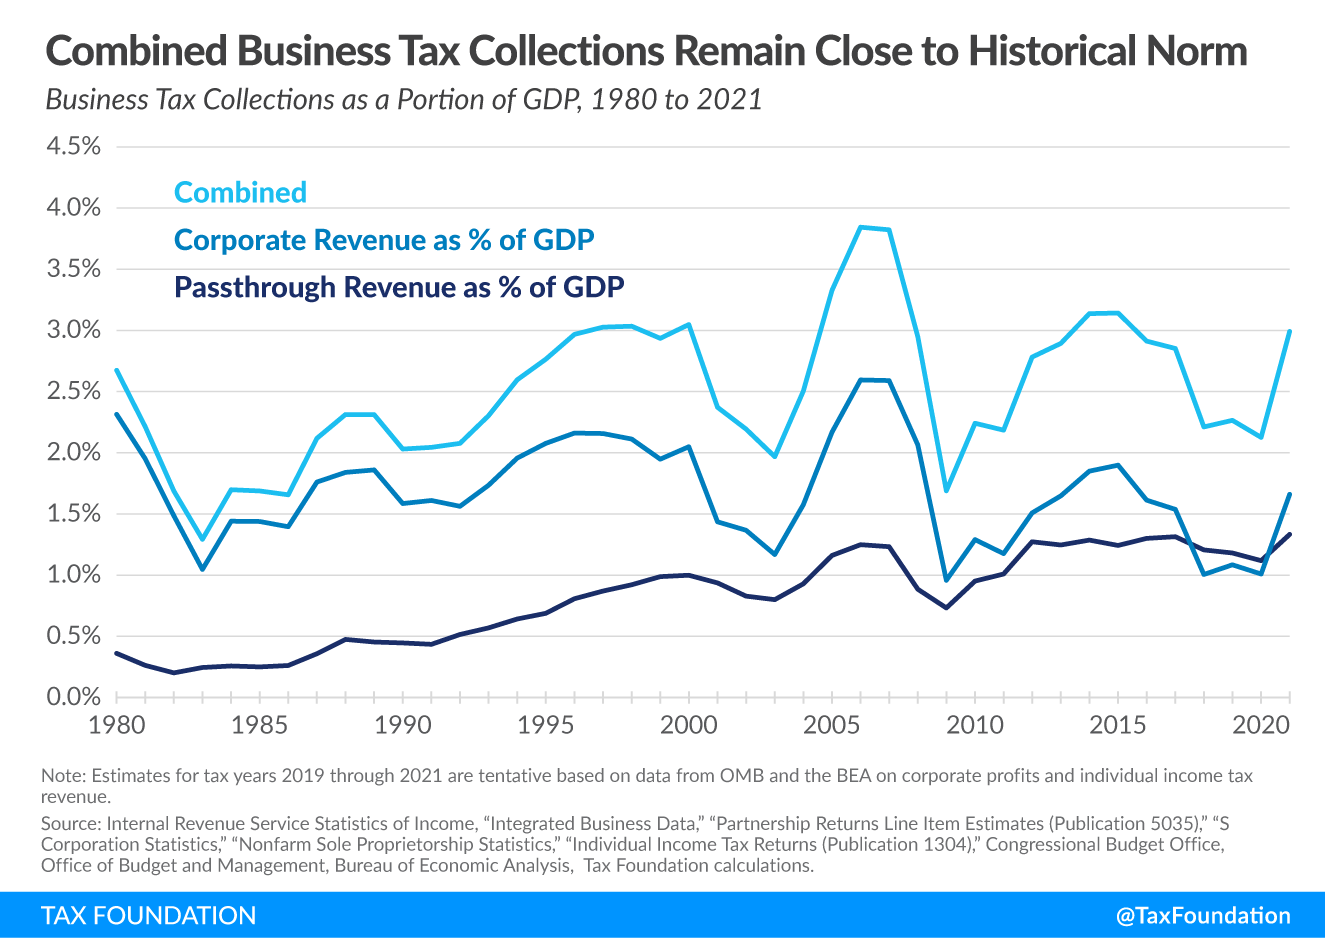 Business Tax Collections Within Historical Norm After Accounting for Pass-through Business Taxes